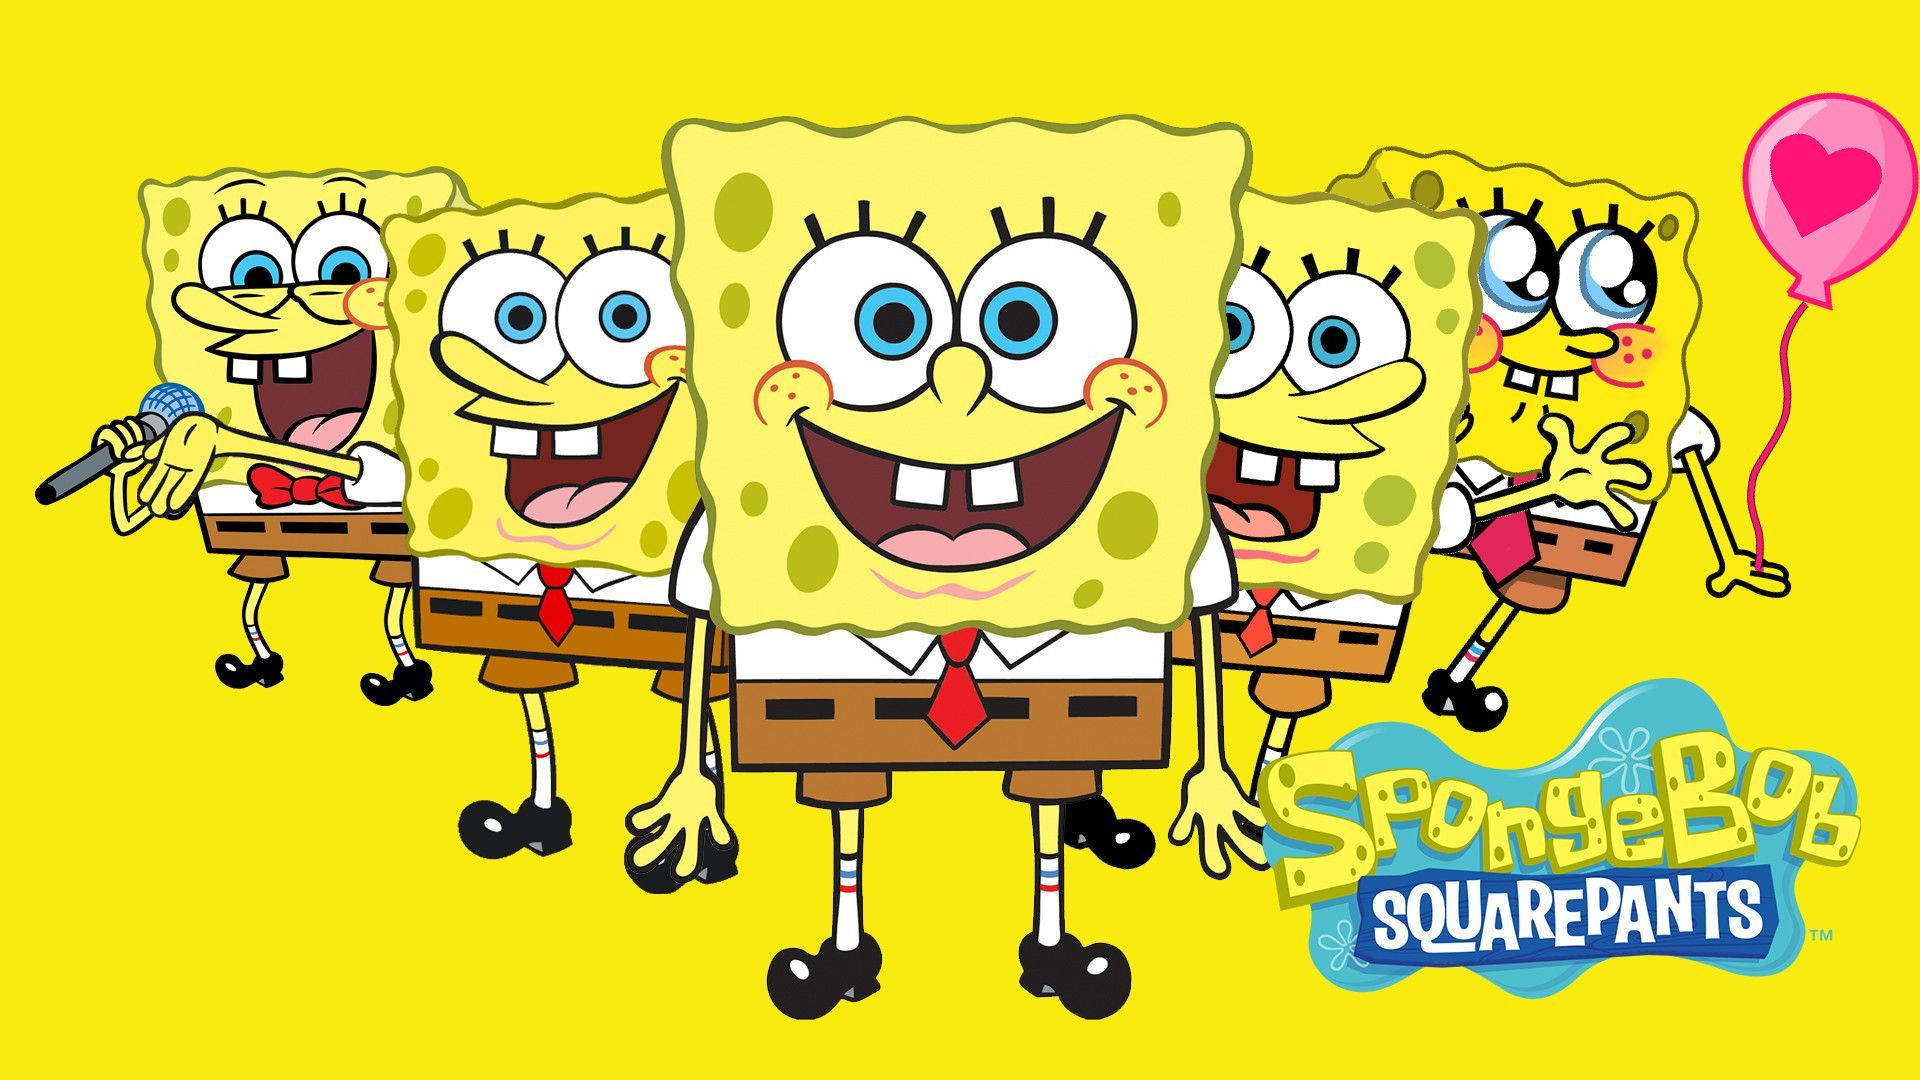 Cute Spongebob Faces In Five Expressions Poster